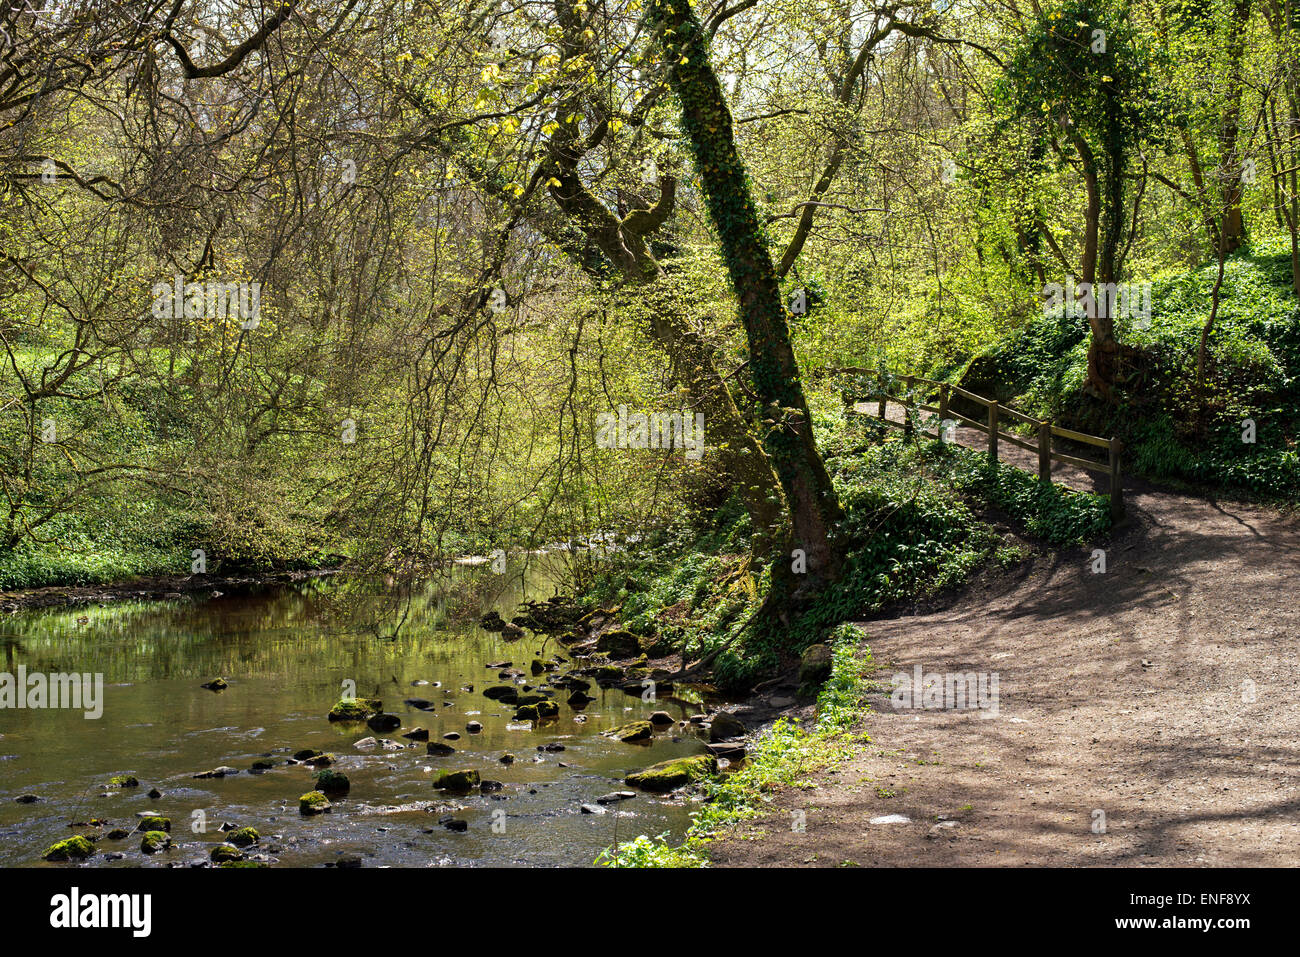 The Water of Leith flowing through Colinton Dell on the outskirts of Edinburgh, Scotland, UK. Stock Photo